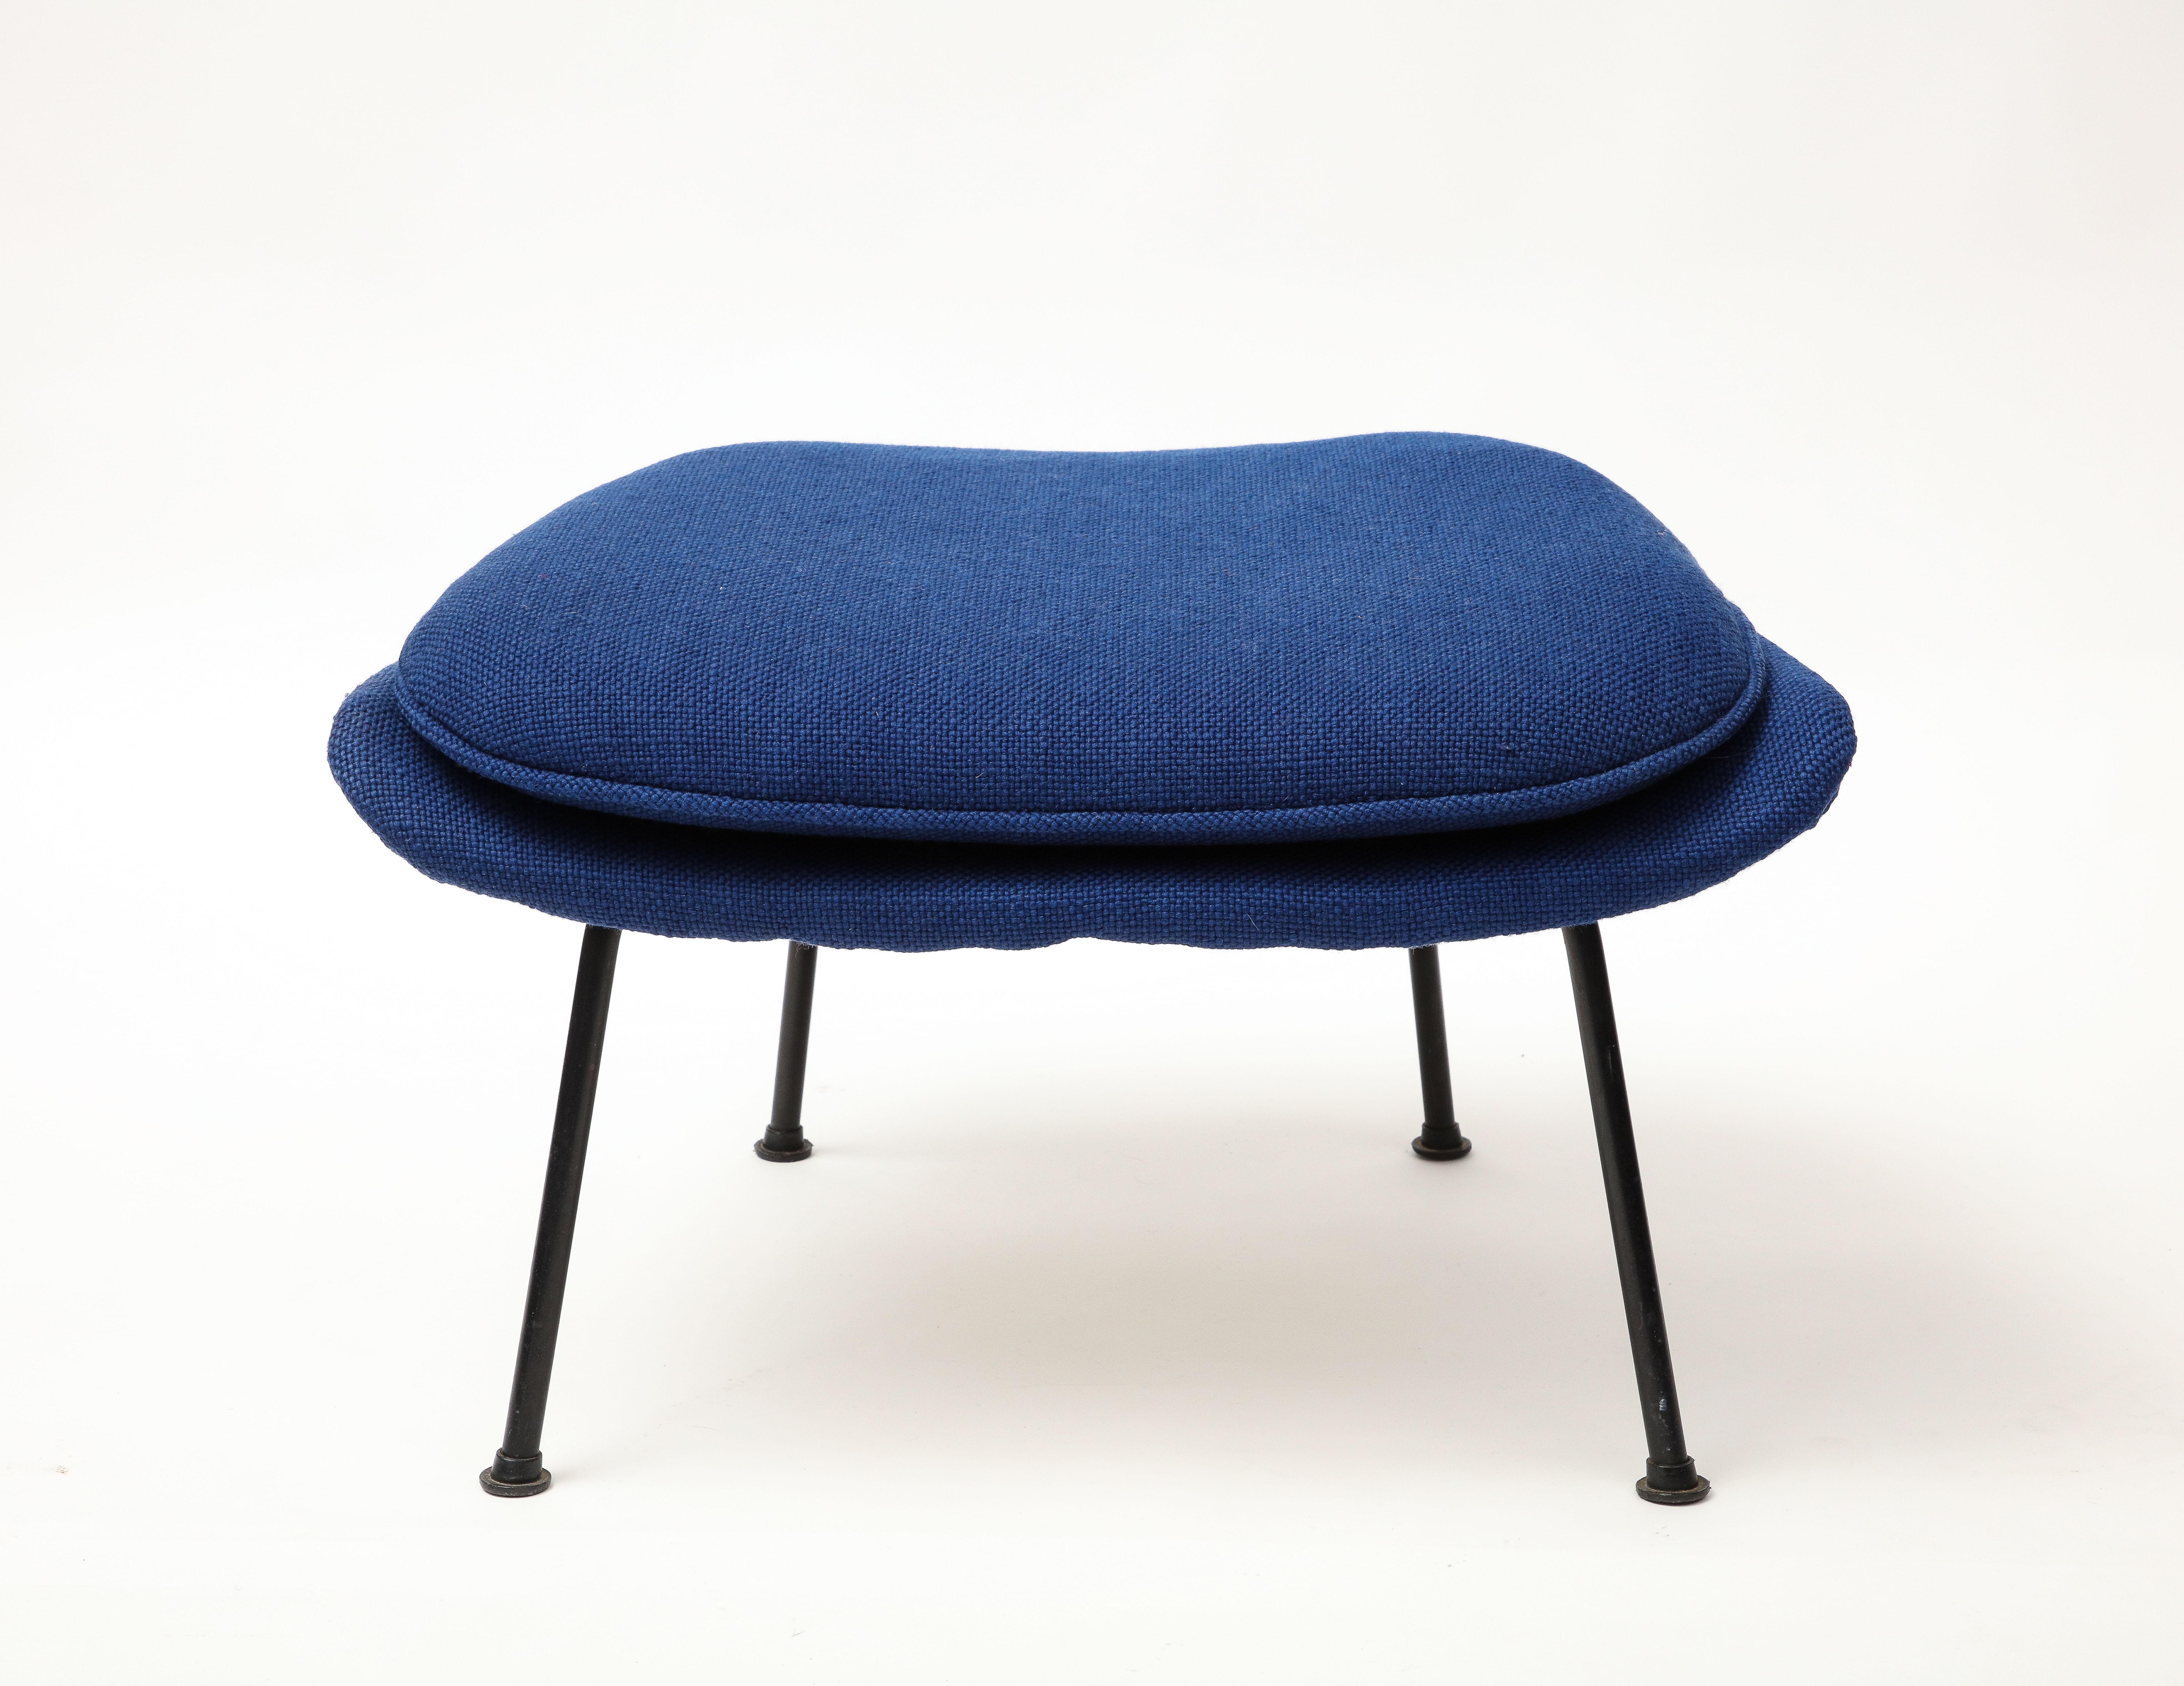 Early Eero Saarinen Knoll Womb Chair & Ottoman, Blue Upholstery, Black Frame In Good Condition For Sale In New York, NY